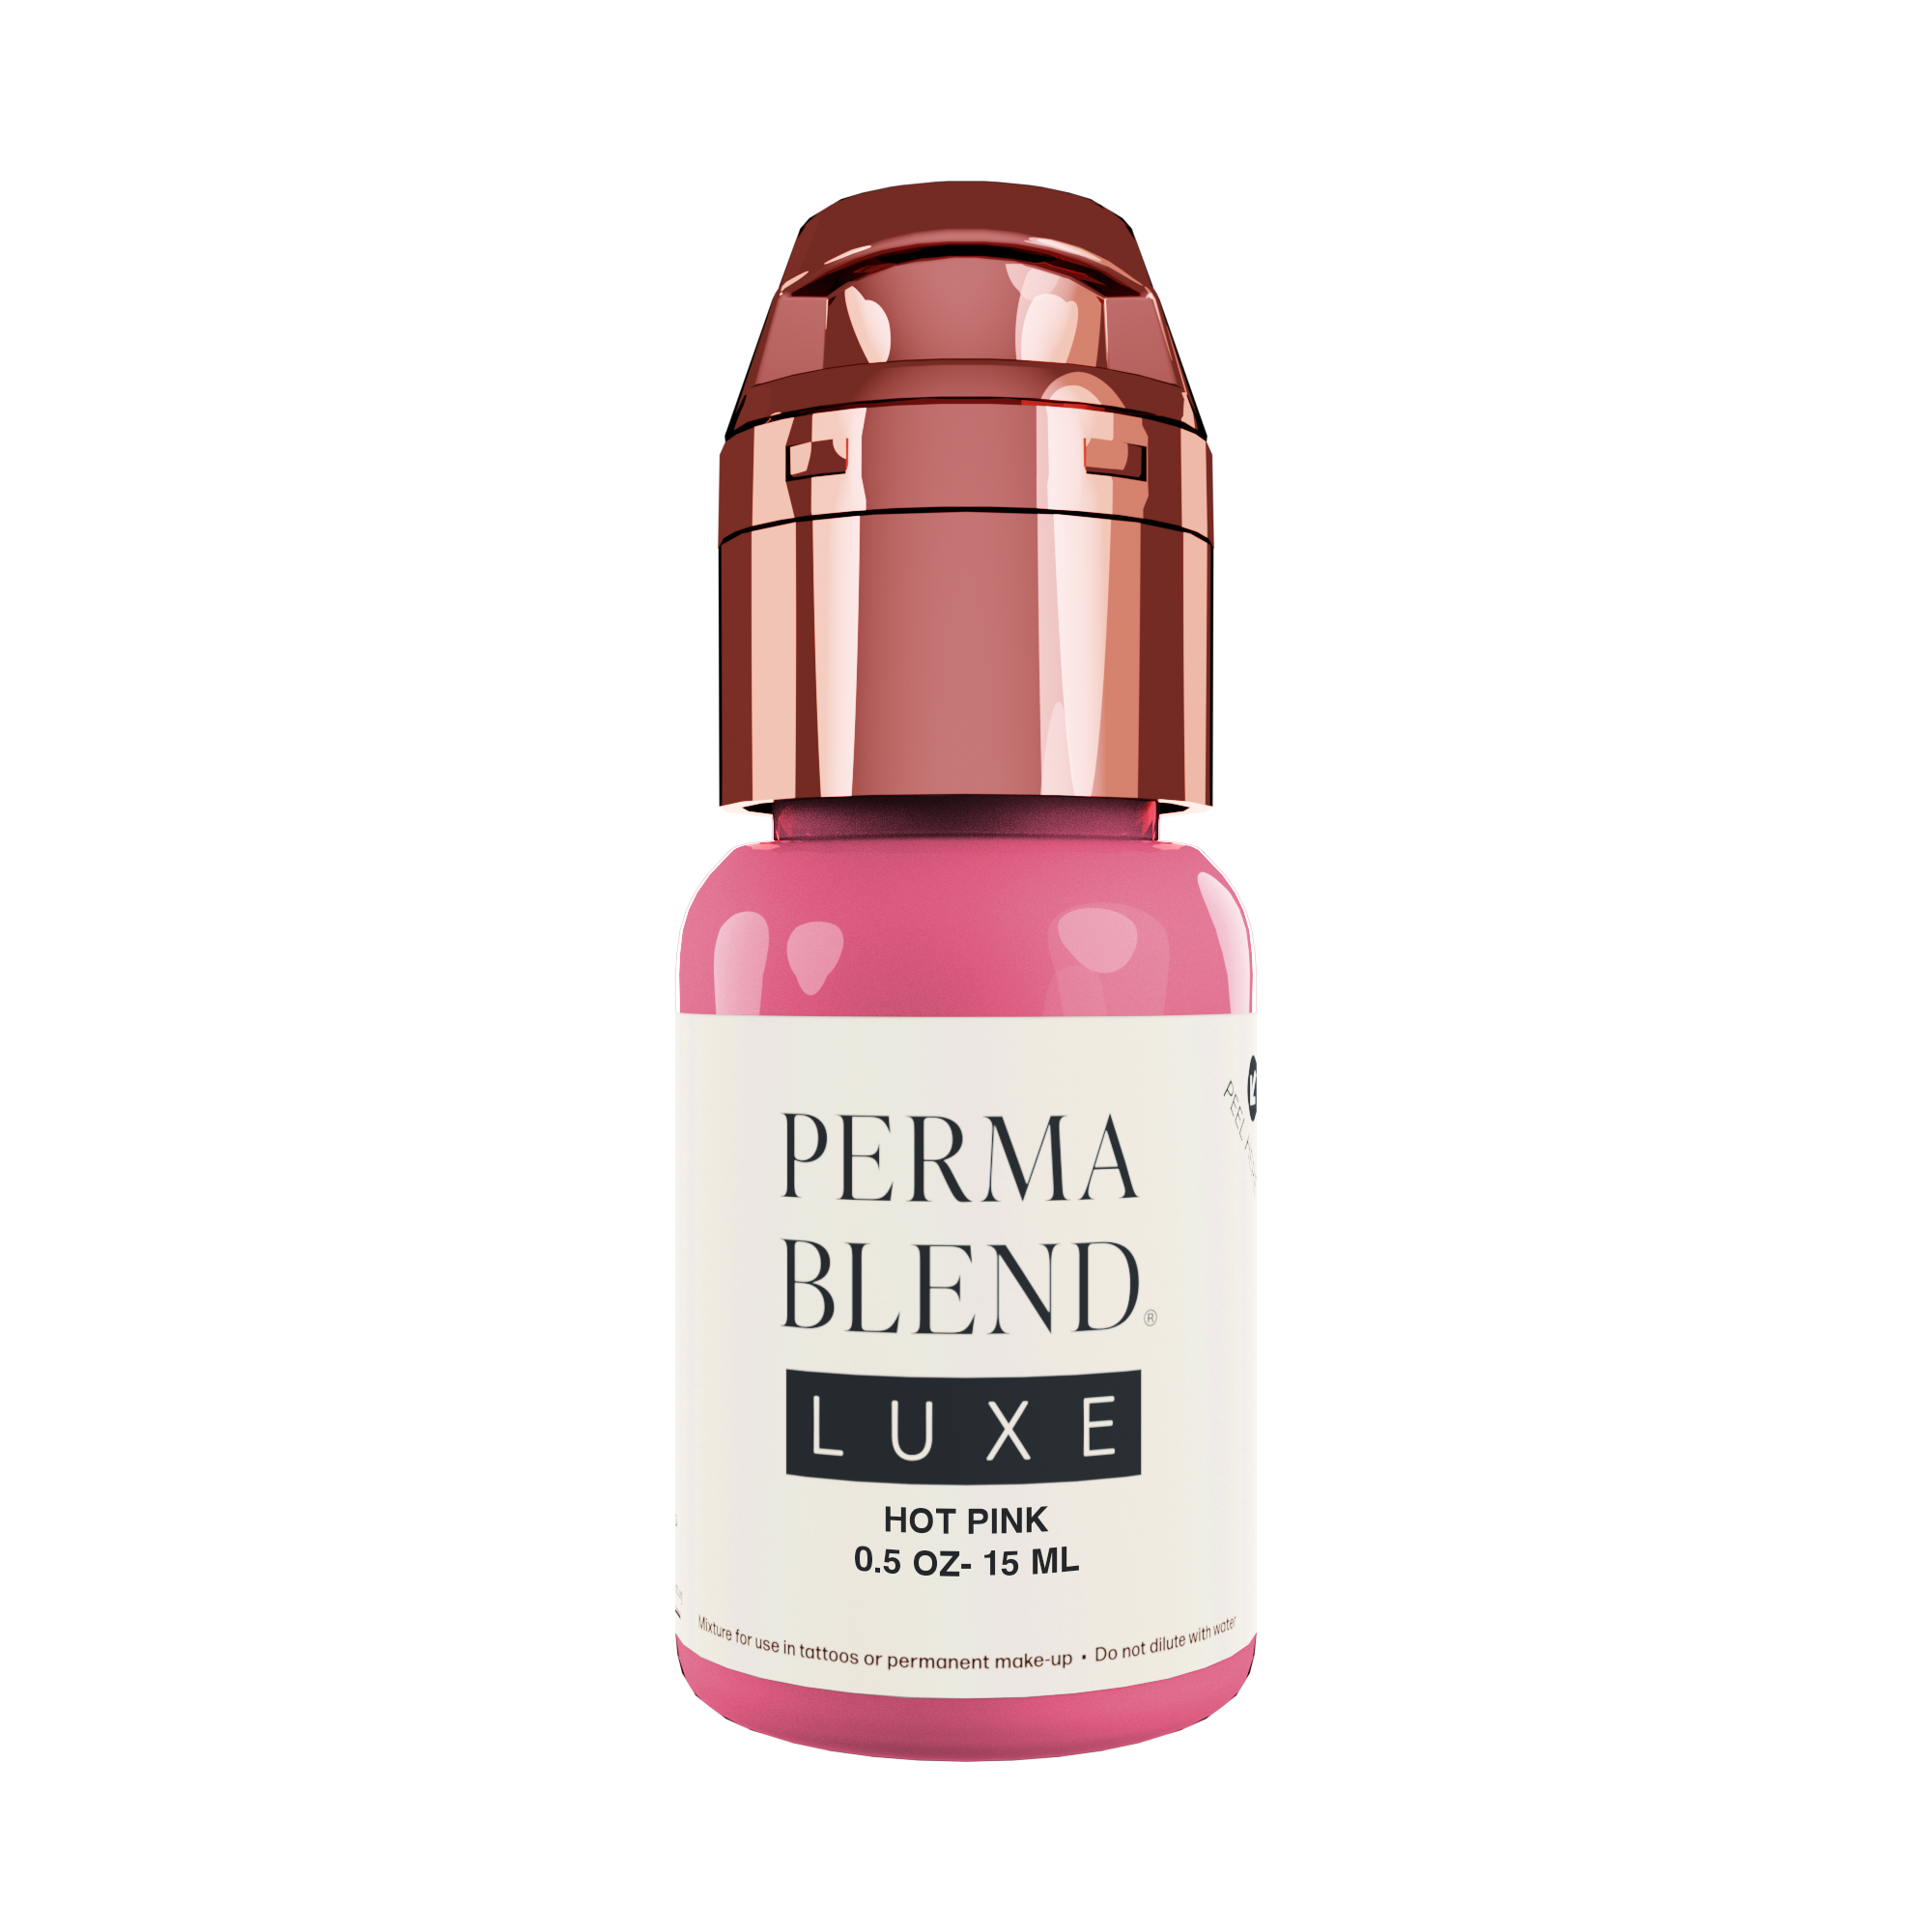 Perma Blend Luxe - HOT PINK - lip color 15ml